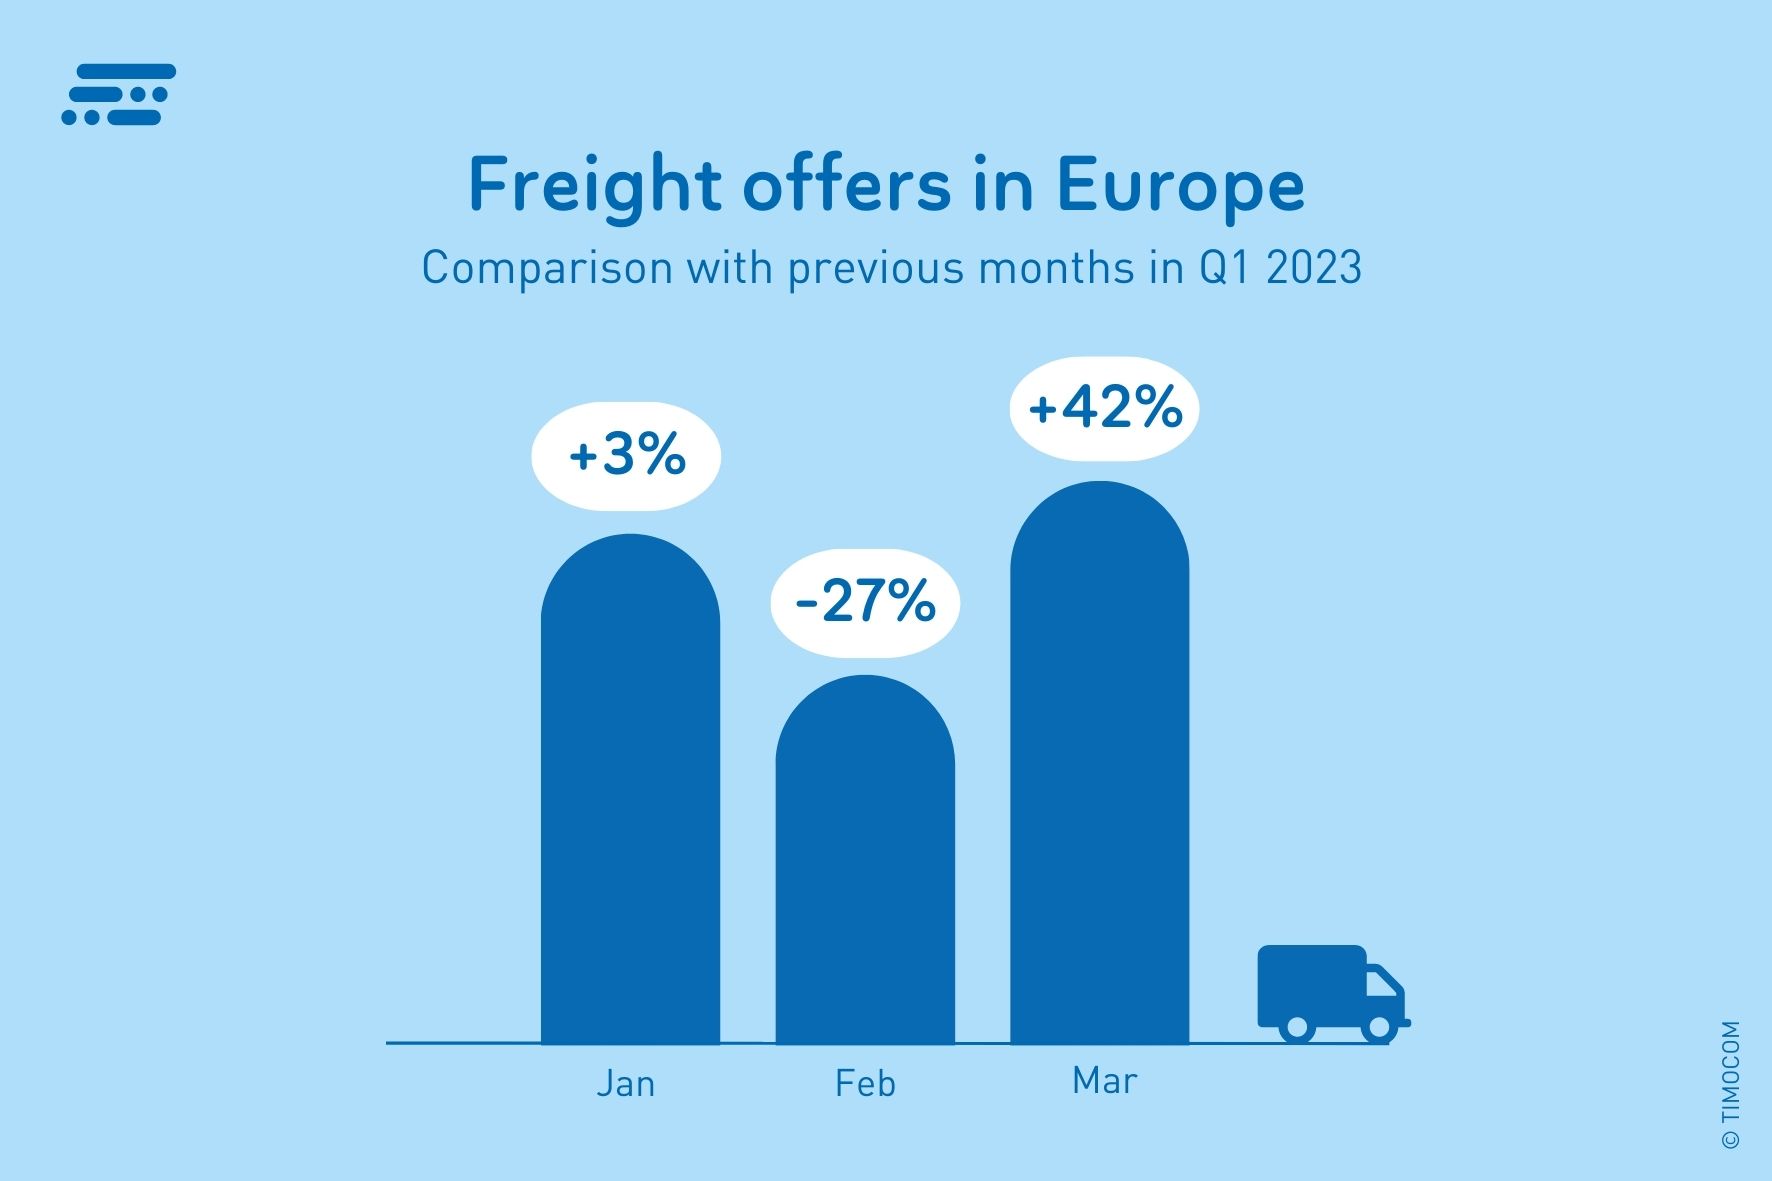 Freight offers in Europe